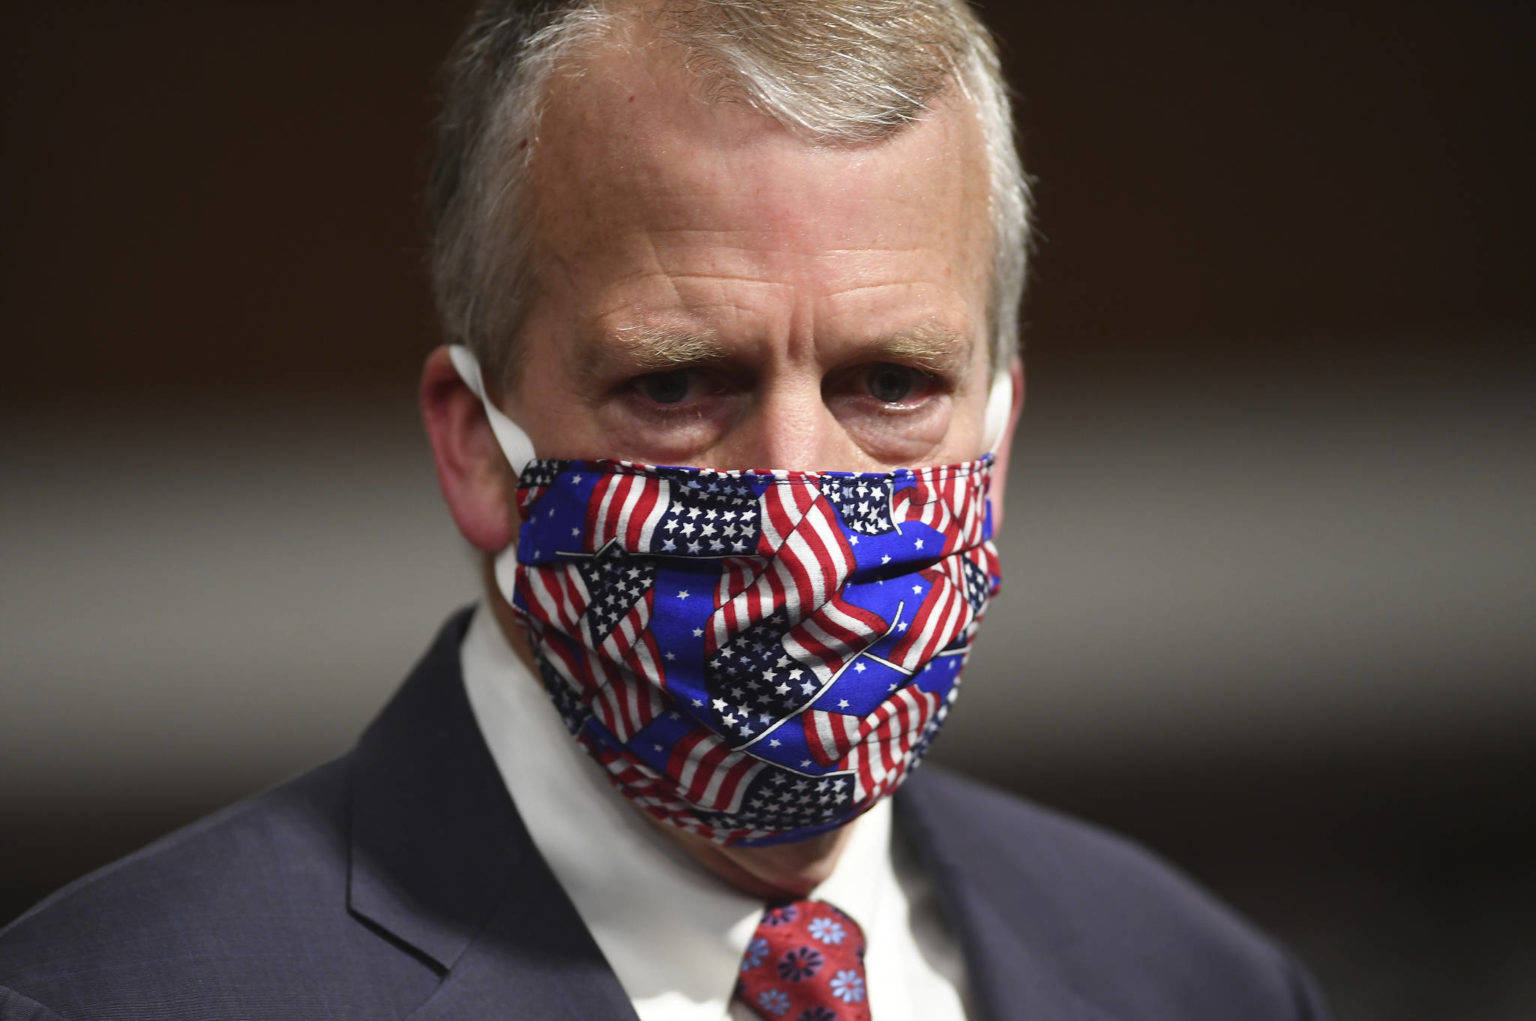 In this May 7, 2020 photo, Sen. Dan Sullivan wears a mask at a hearing in Washington. Sullivan's office released a statement Monday saying the senator would support a confirmation vote to fill the vacancy on the U.S. Supreme Court even in an election year. (Kevin Dietsch/Pool via AP)